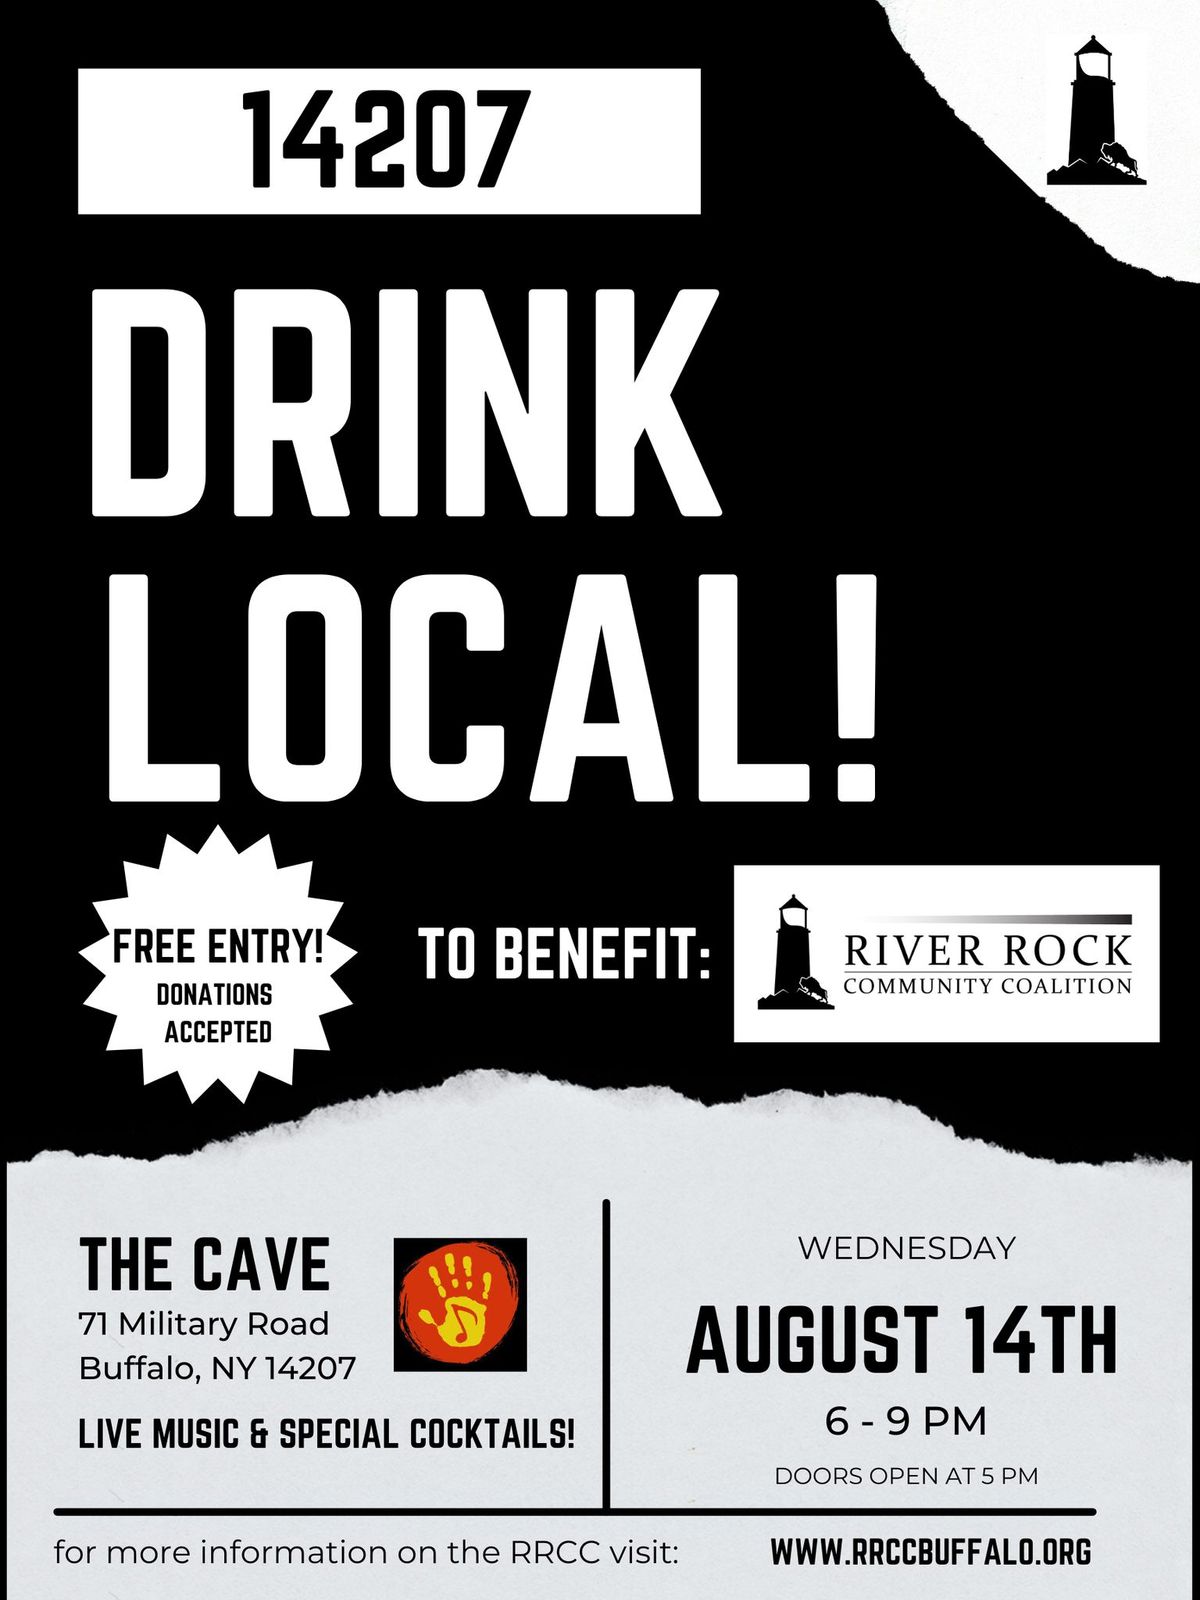 Drink Local 14207 at the Cave featuring Justin Rizzo